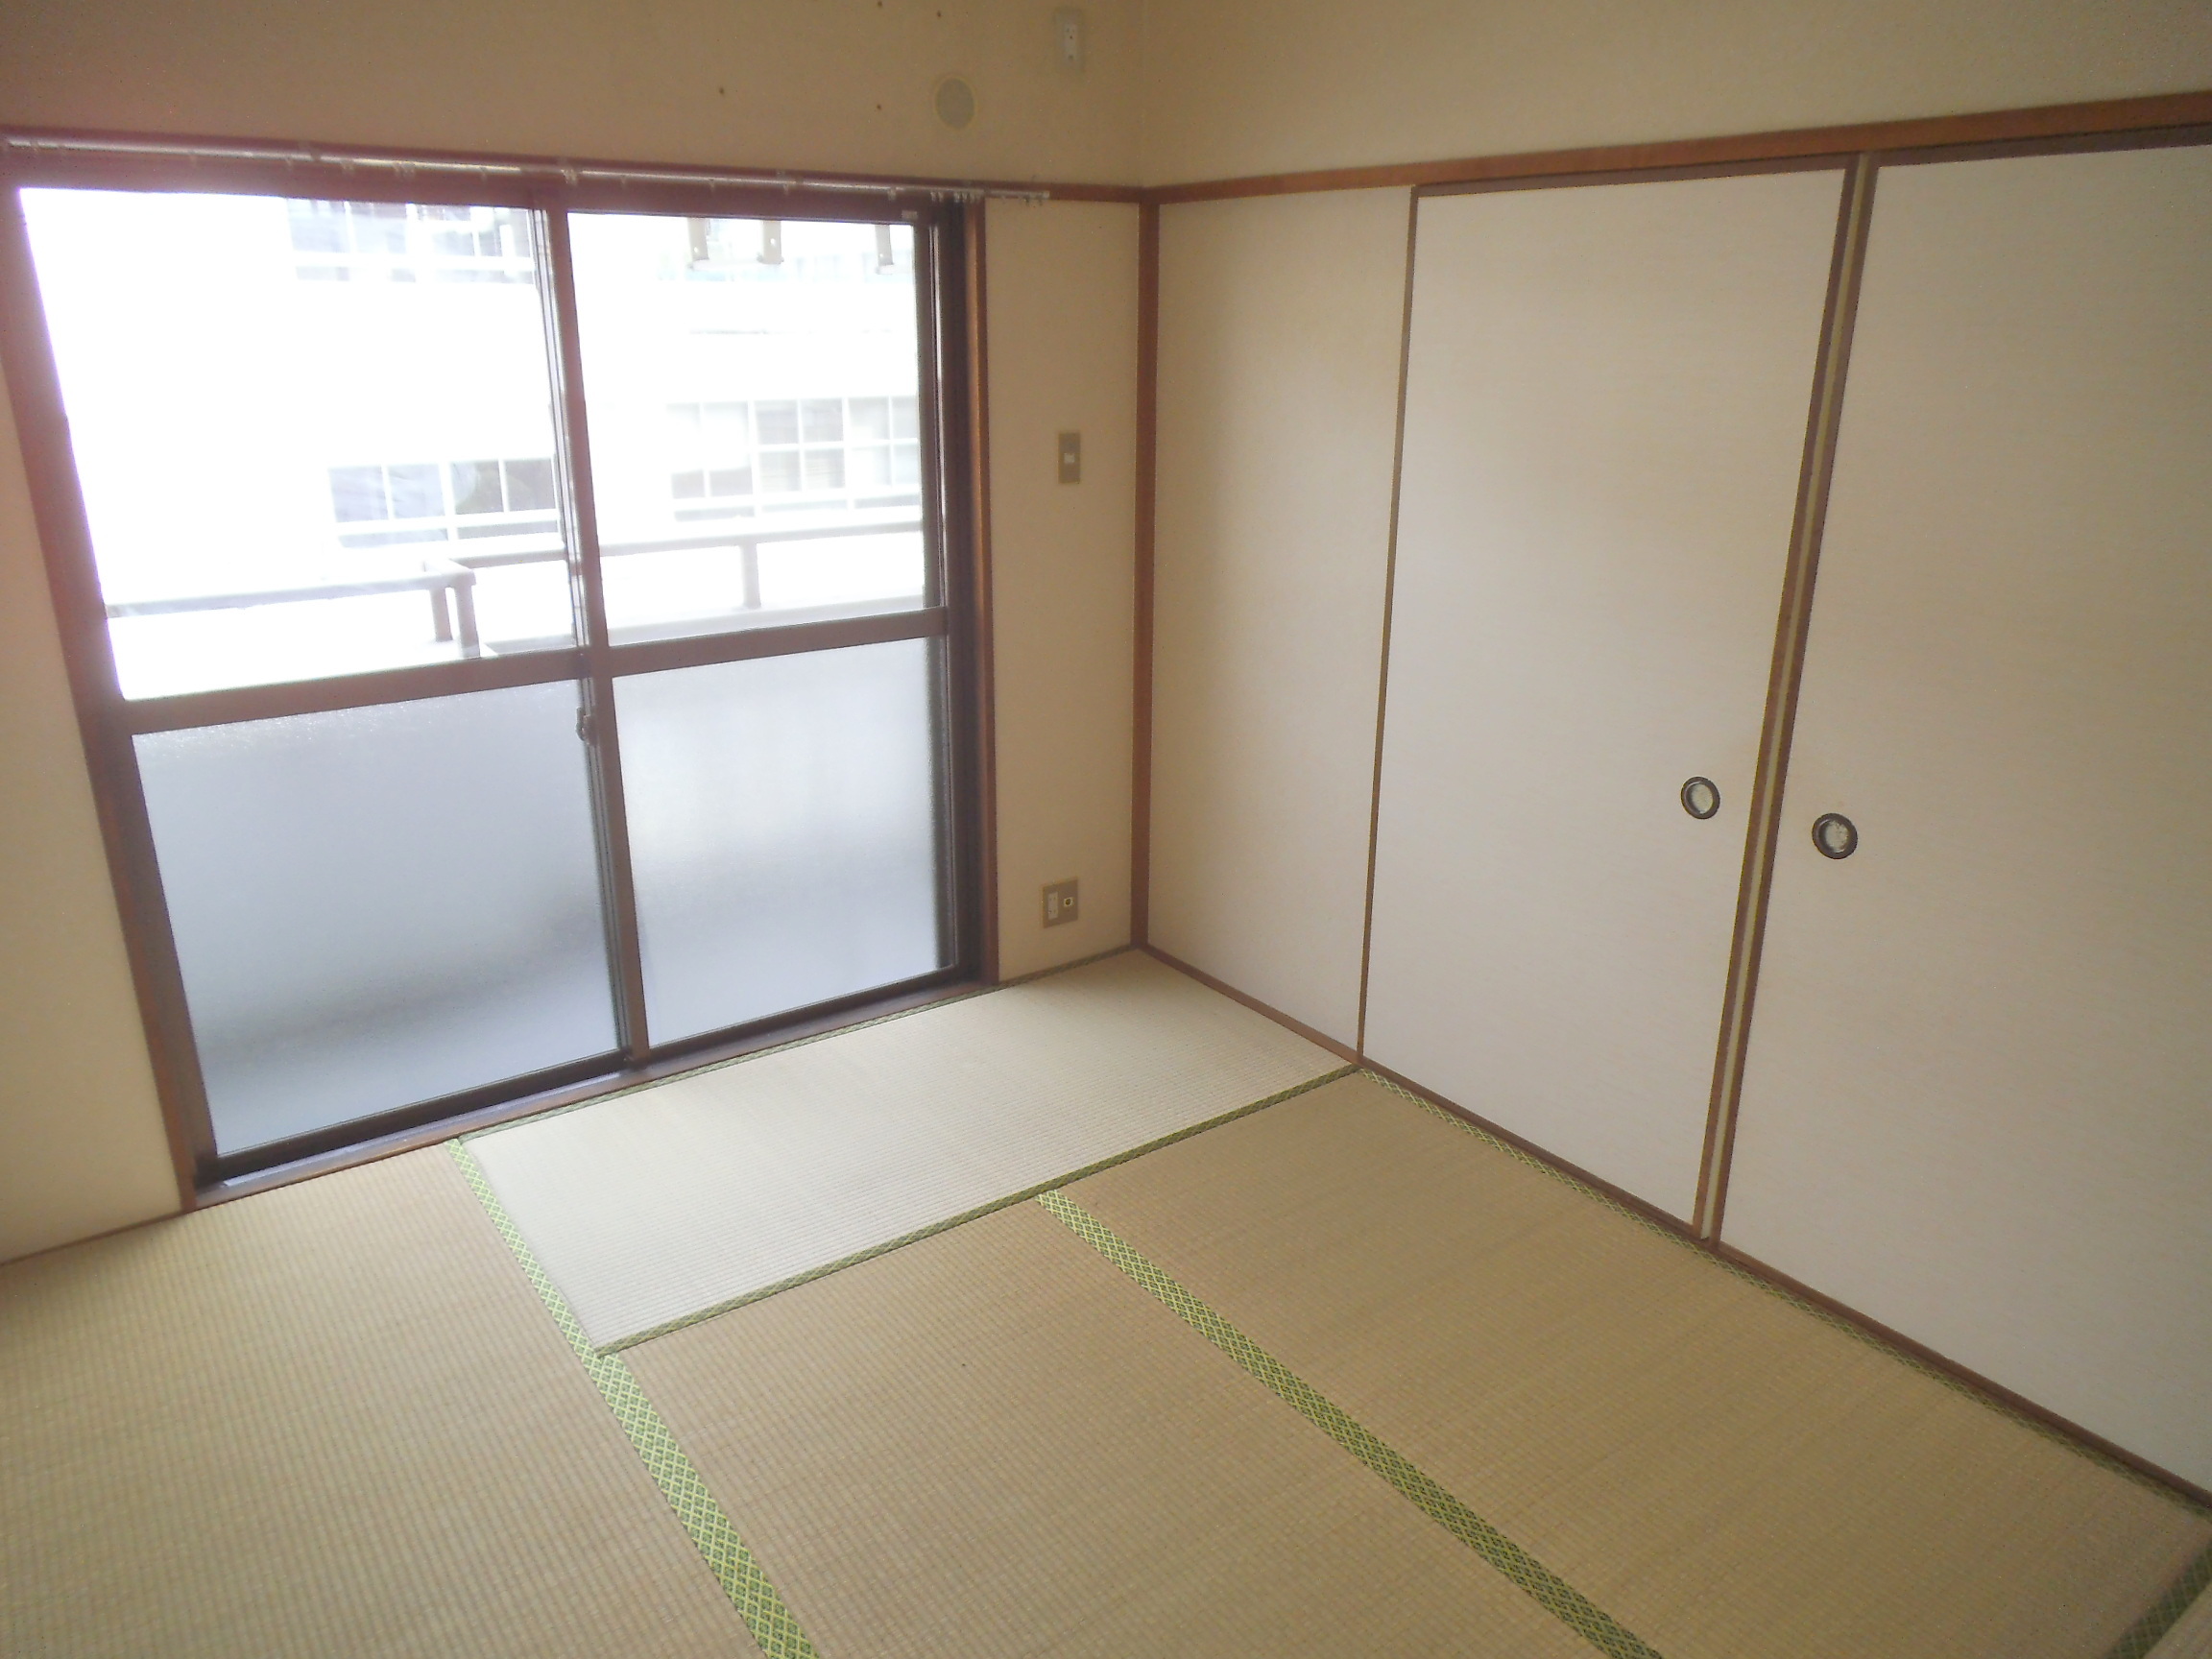 Other room space. The room is bright for one of the recommended point also on the south-facing